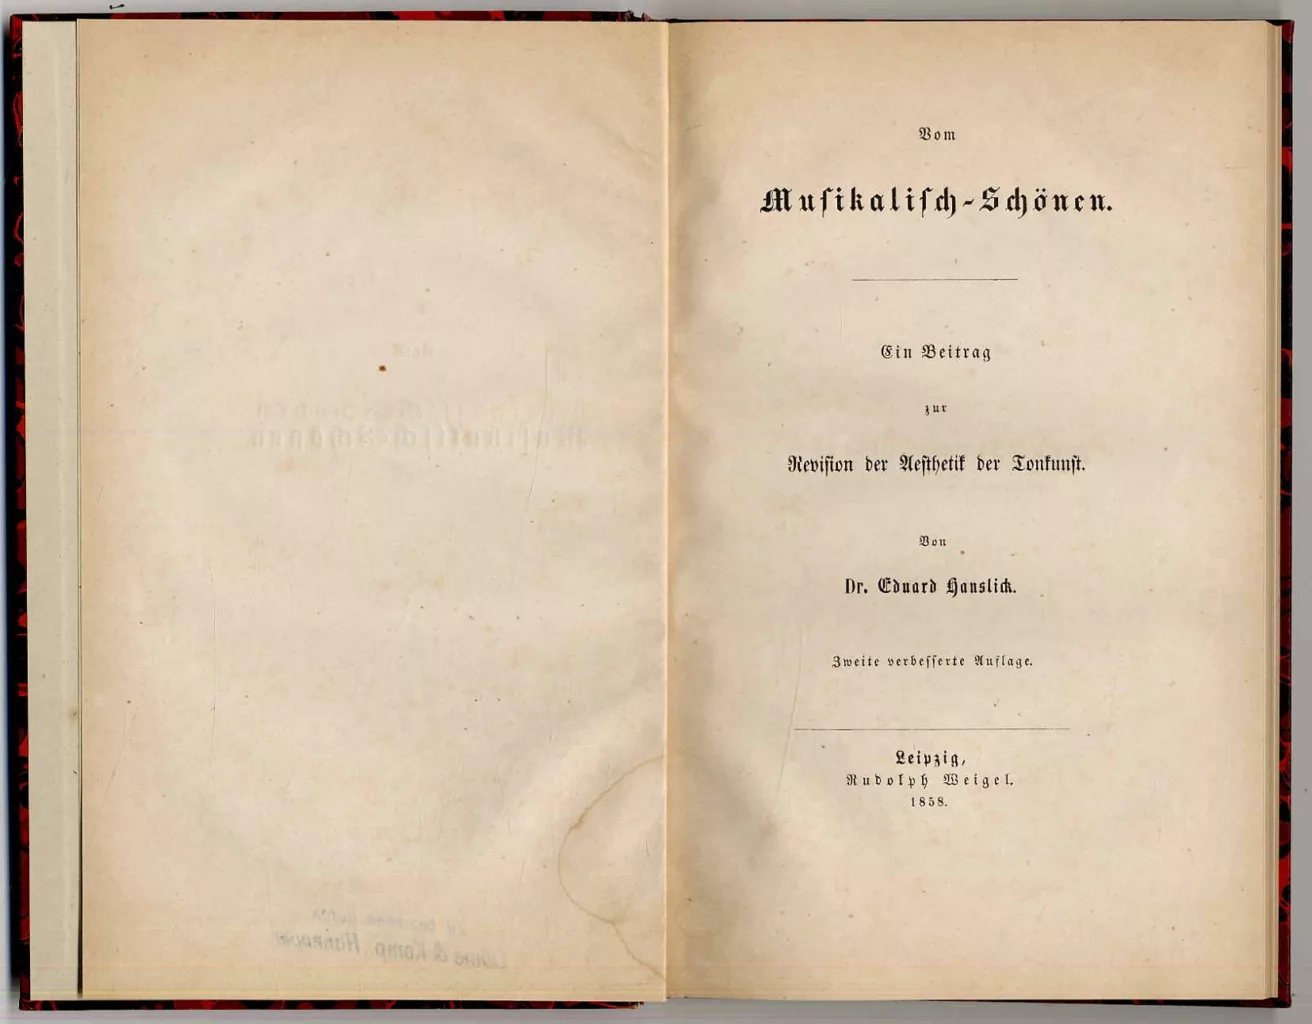 First edition of 